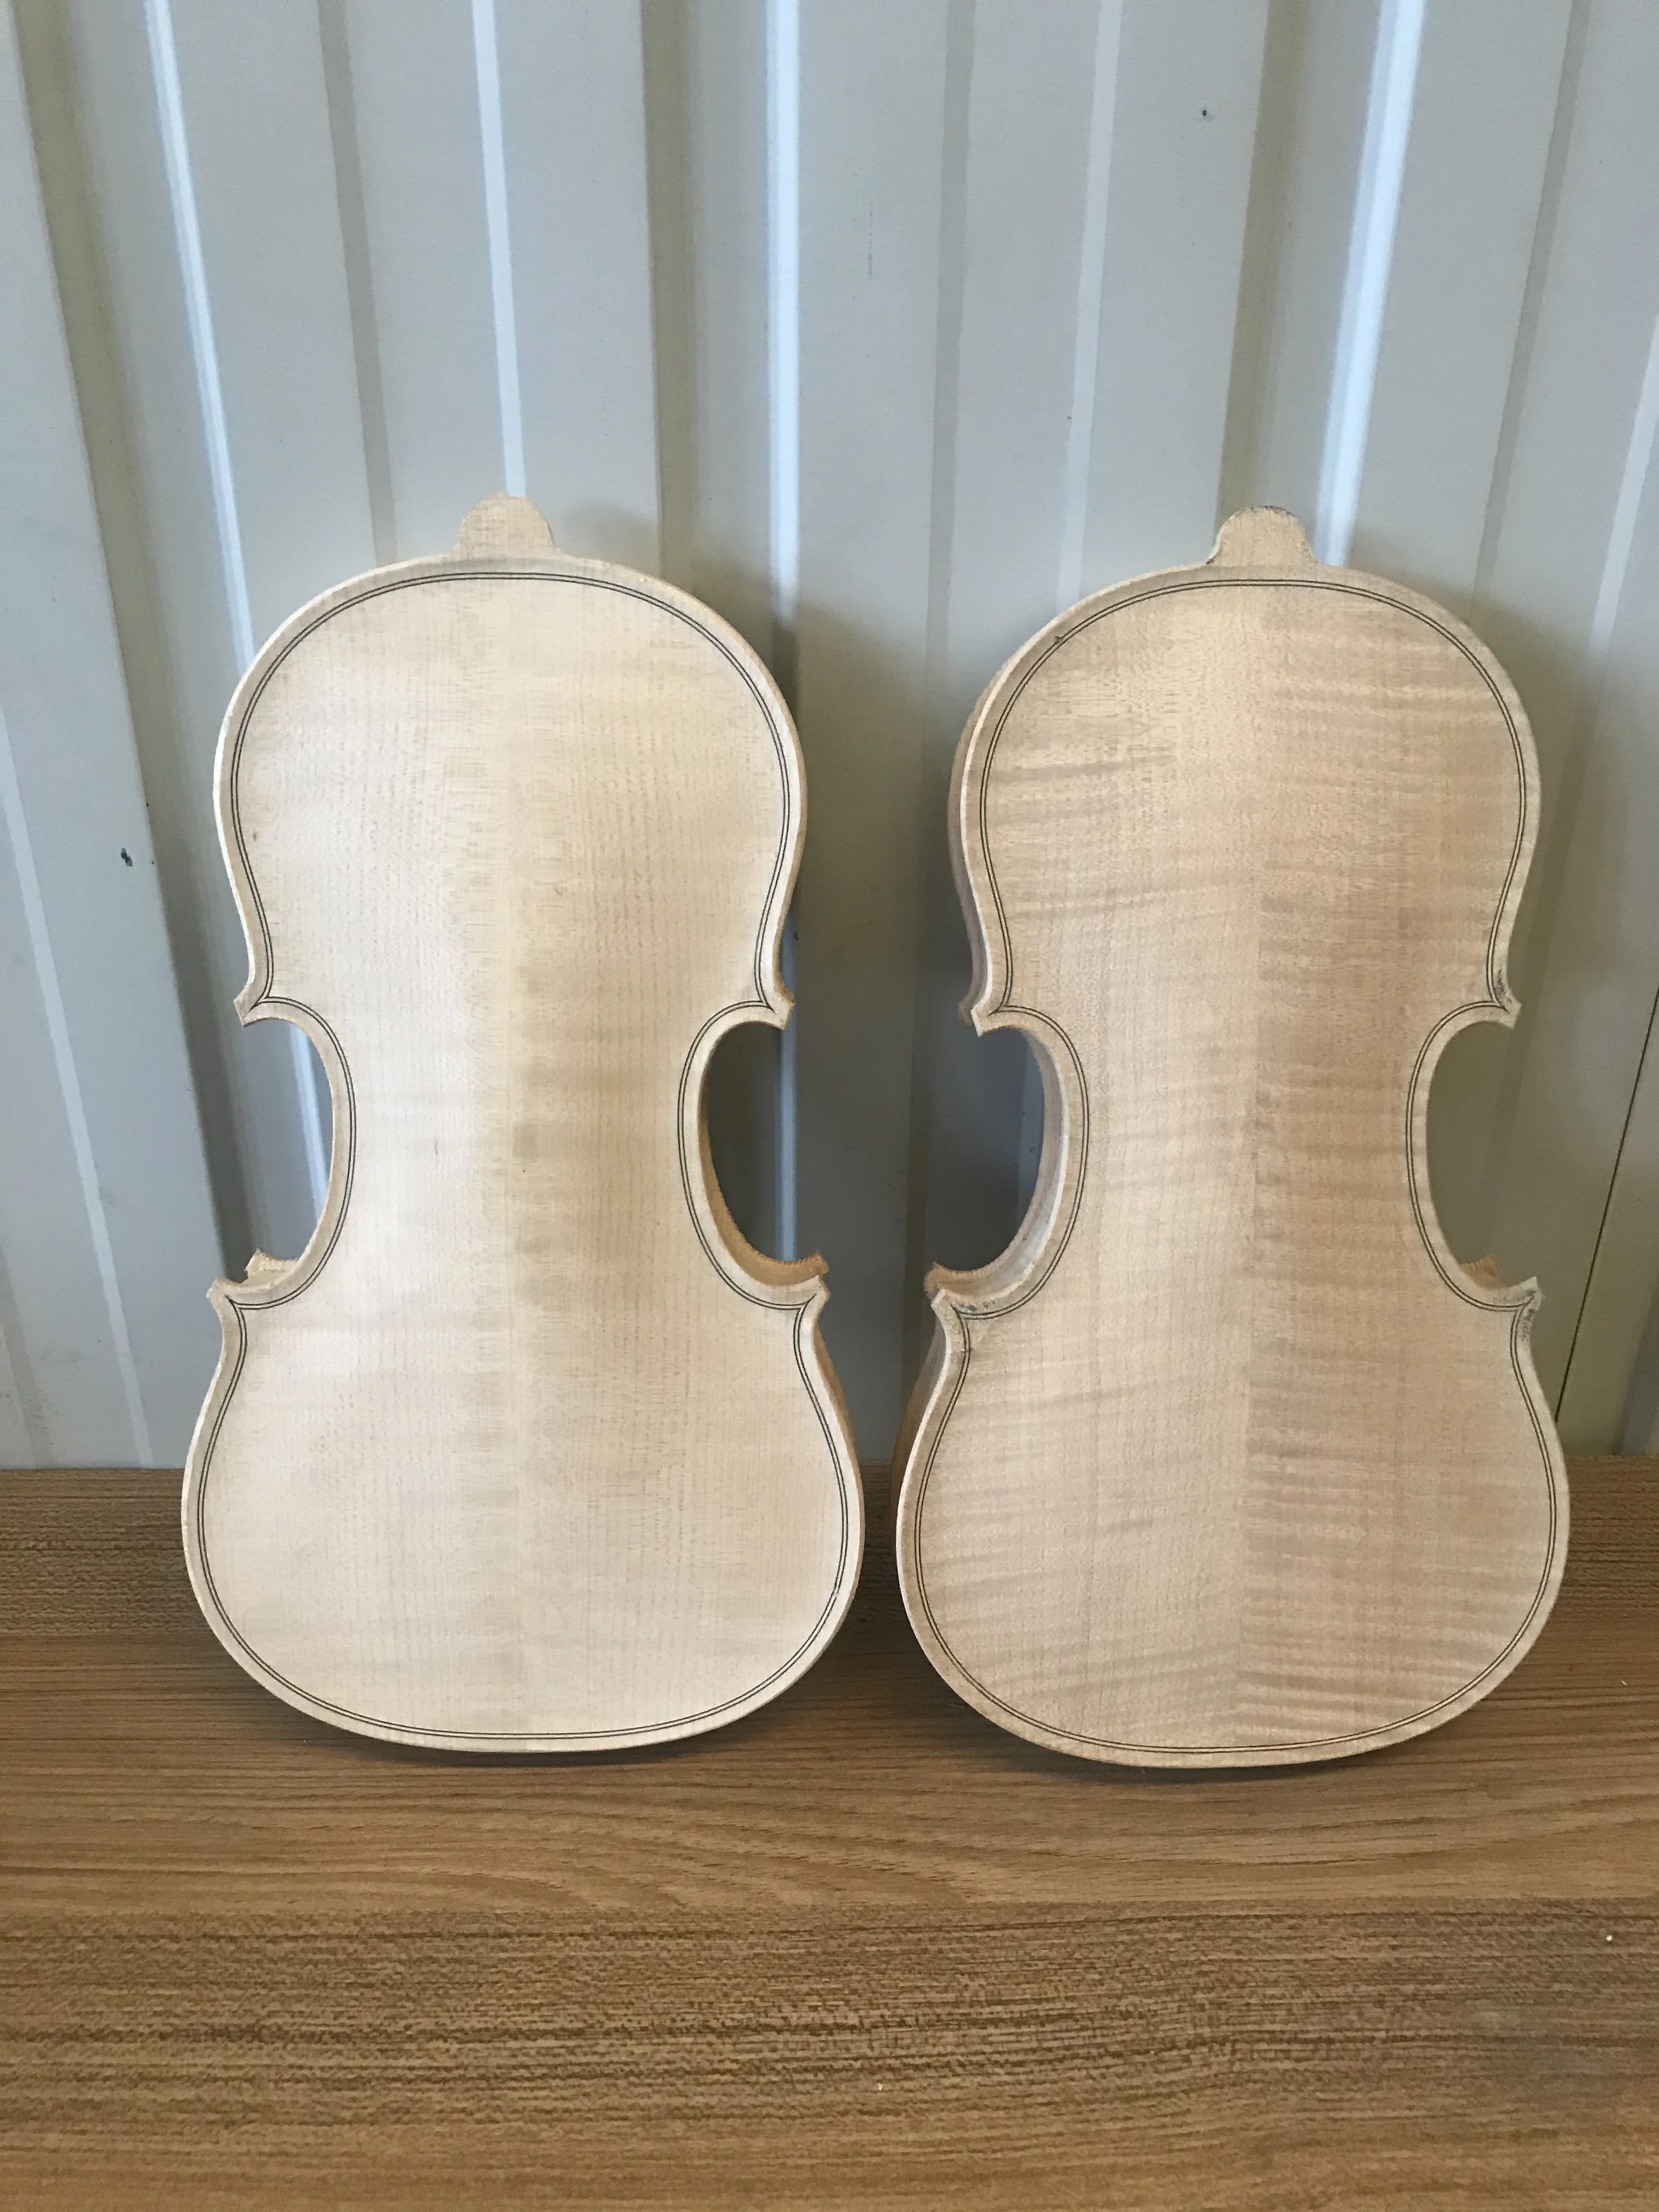 1 Pcs High Quality 1/4 Unfinished Violin Body White Body Spruce Panel Maple Back Luthier DIY Violin